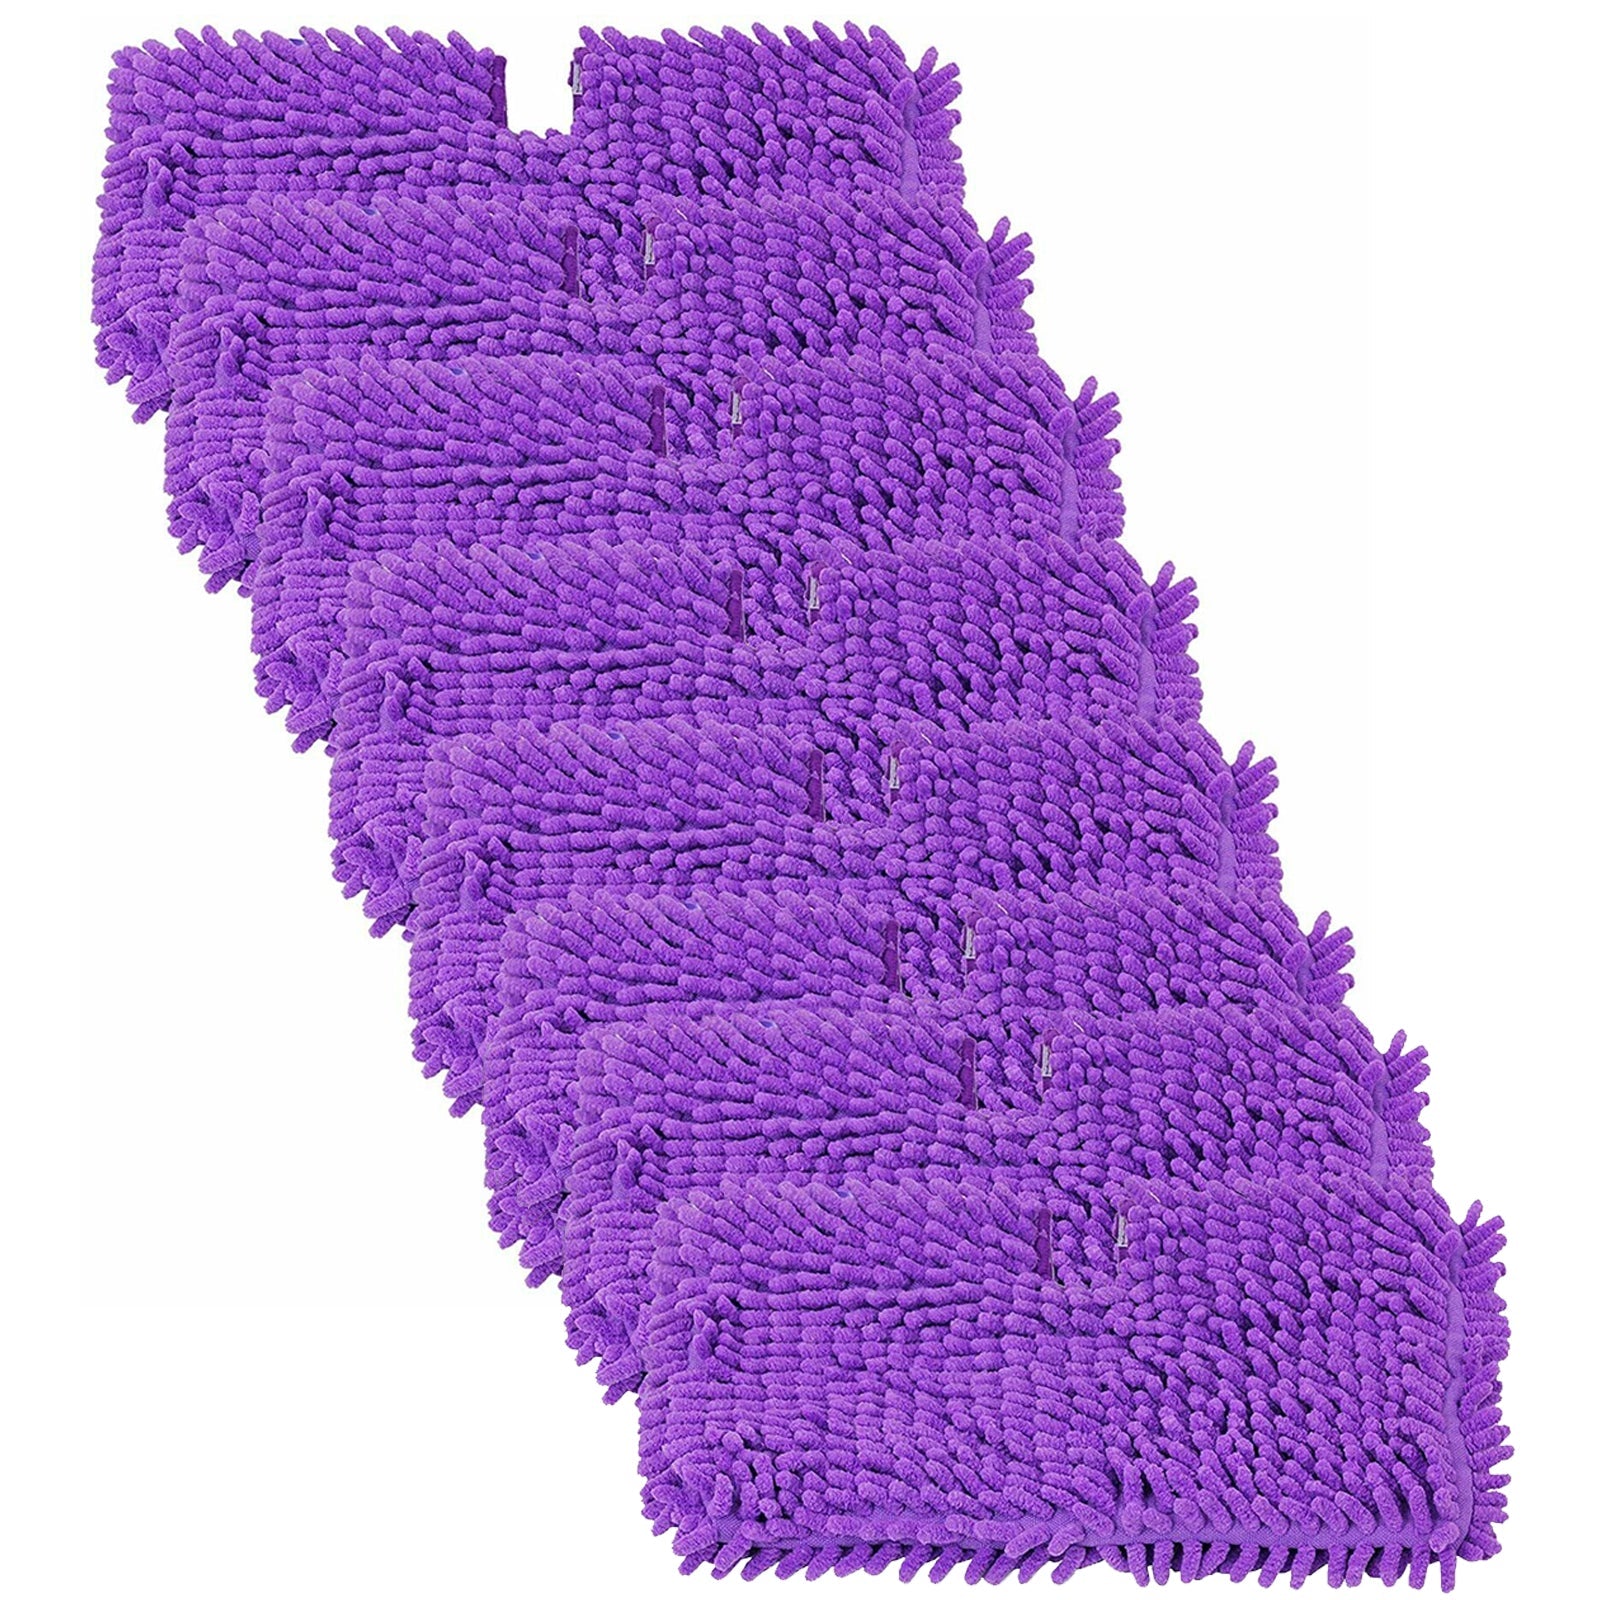 Steam Cleaner Cover Pads for Shark S3450 S3452 S3455K S3550 SE400 SE450 Mop (Pack of 8, Purple)